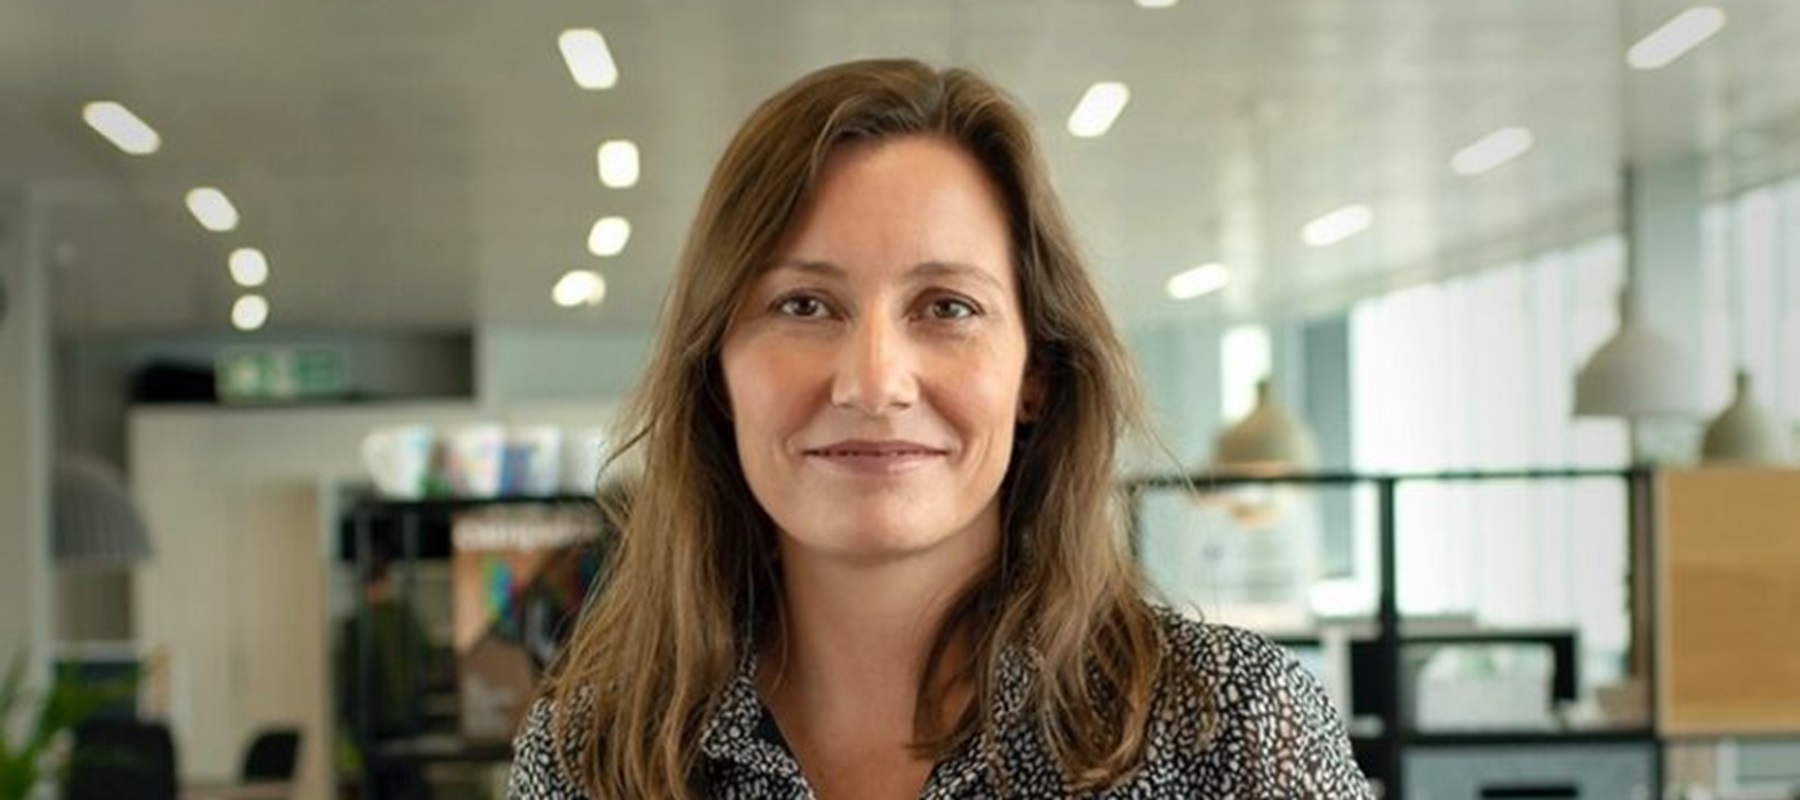 UK-based PA Media Group appoints Emily Shelley as CEO